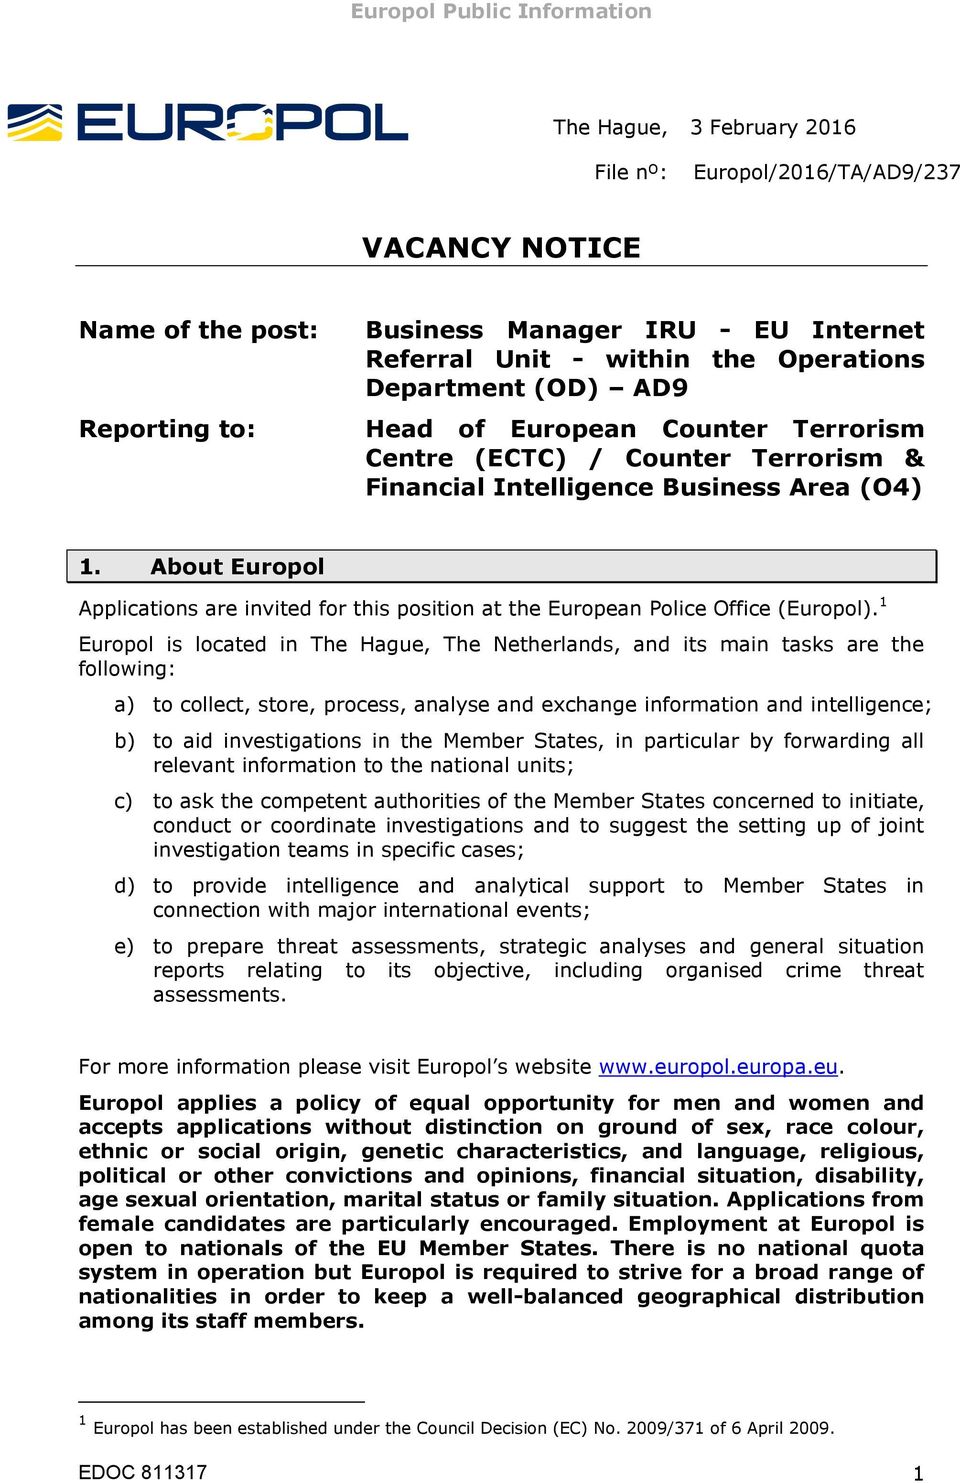 About Europol Applications are invited for this position at the European Police Office (Europol).